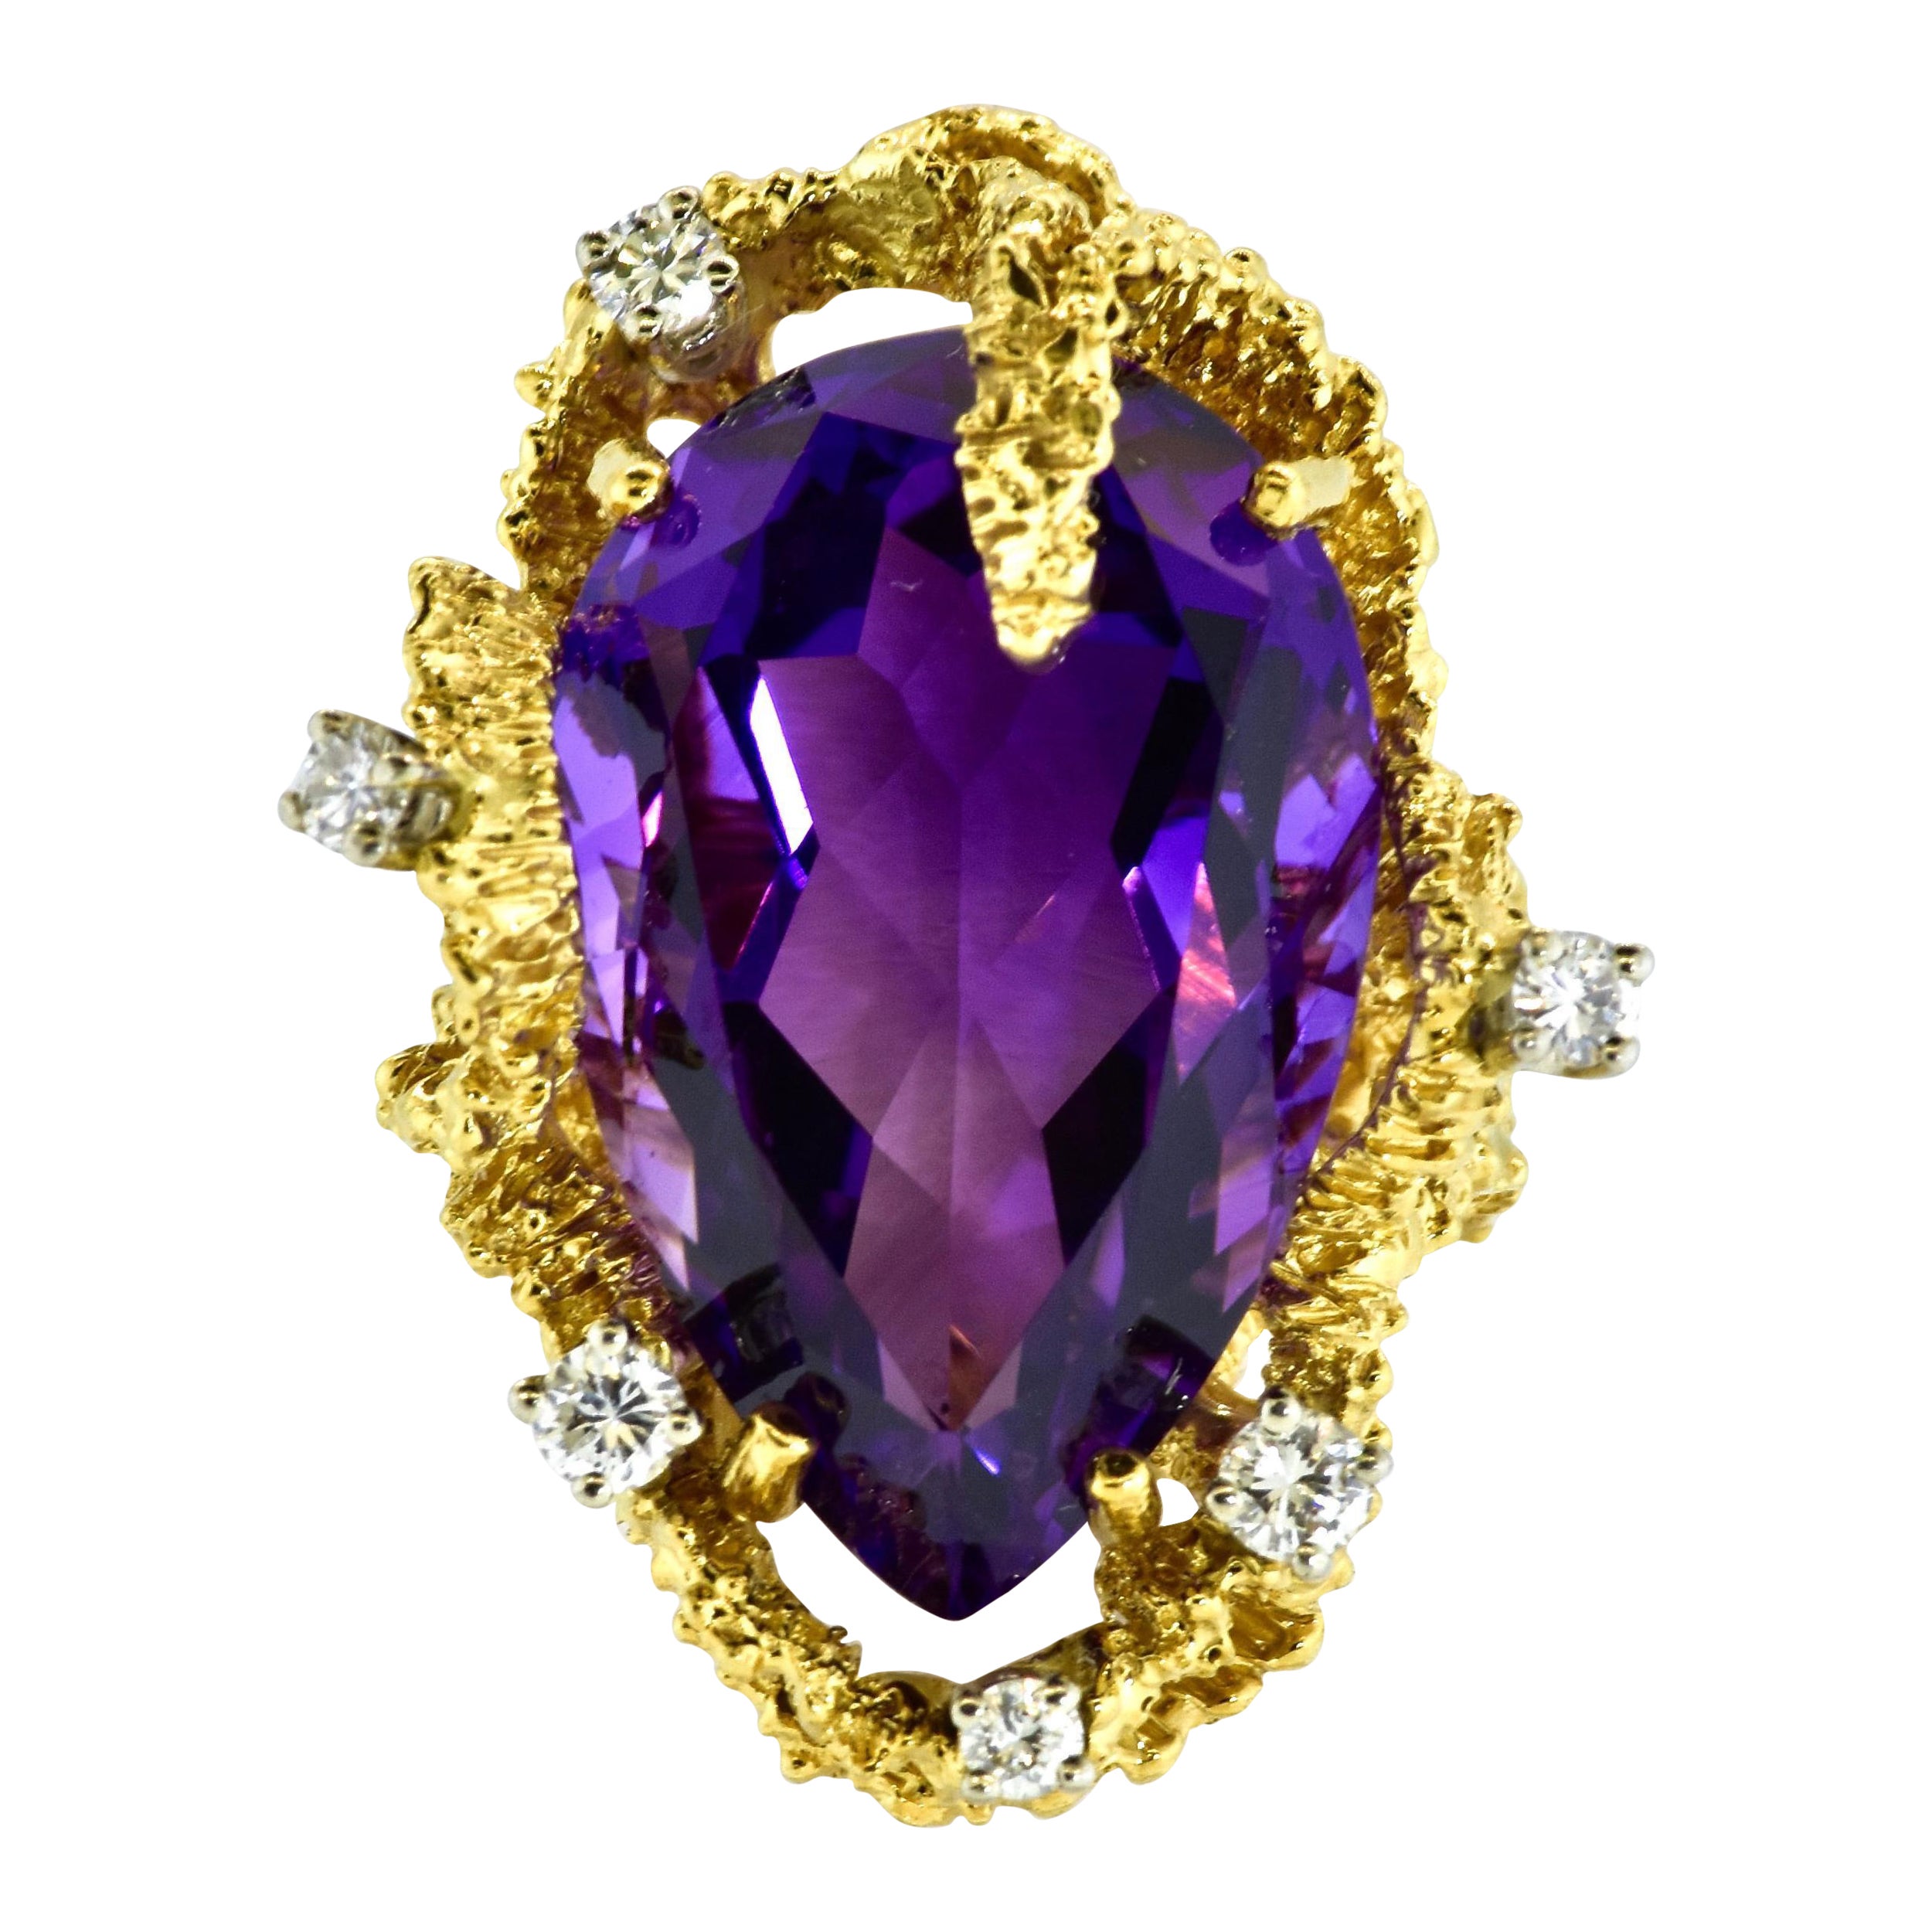  Brutalist 18K ring with amethyst and diamonds probably by Arthur King an American designer in the 1960's and 1970's.  His jewelry can be seen in major museums such as MOMA and the V & A in London.  He was also collected by many of the major movie